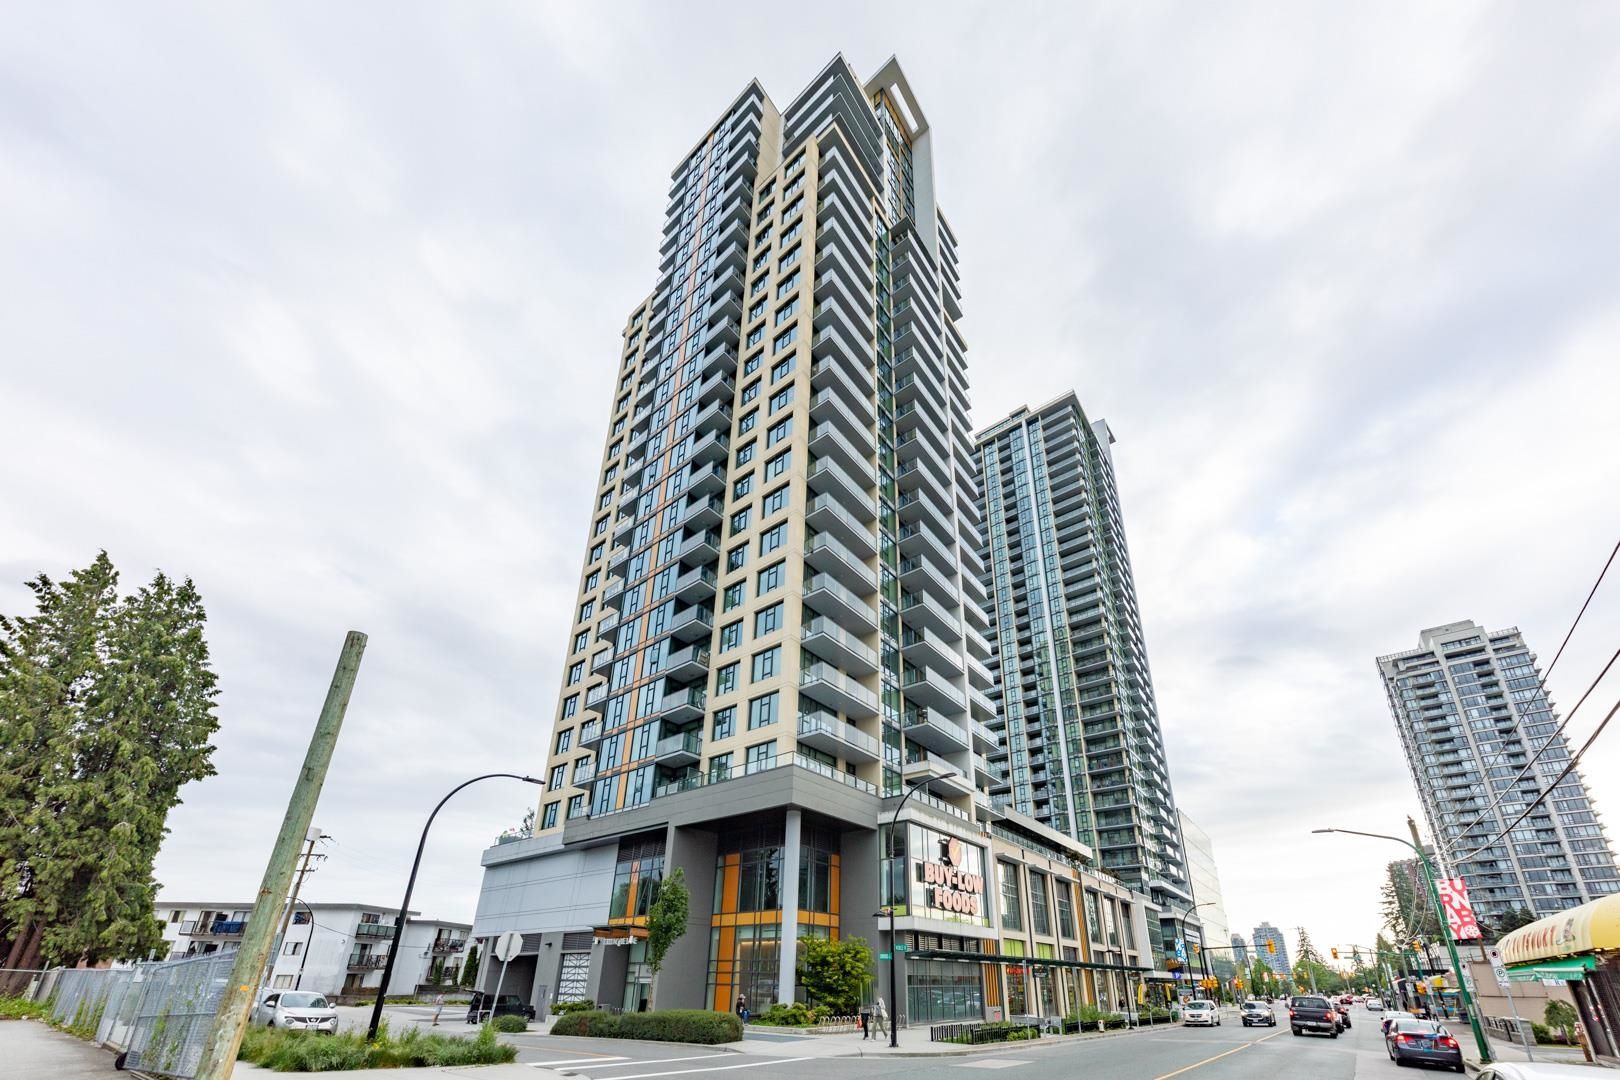 Main Photo: 2209 7303 NOBLE Lane in Burnaby: Edmonds BE Condo for sale (Burnaby East)  : MLS®# R2700494